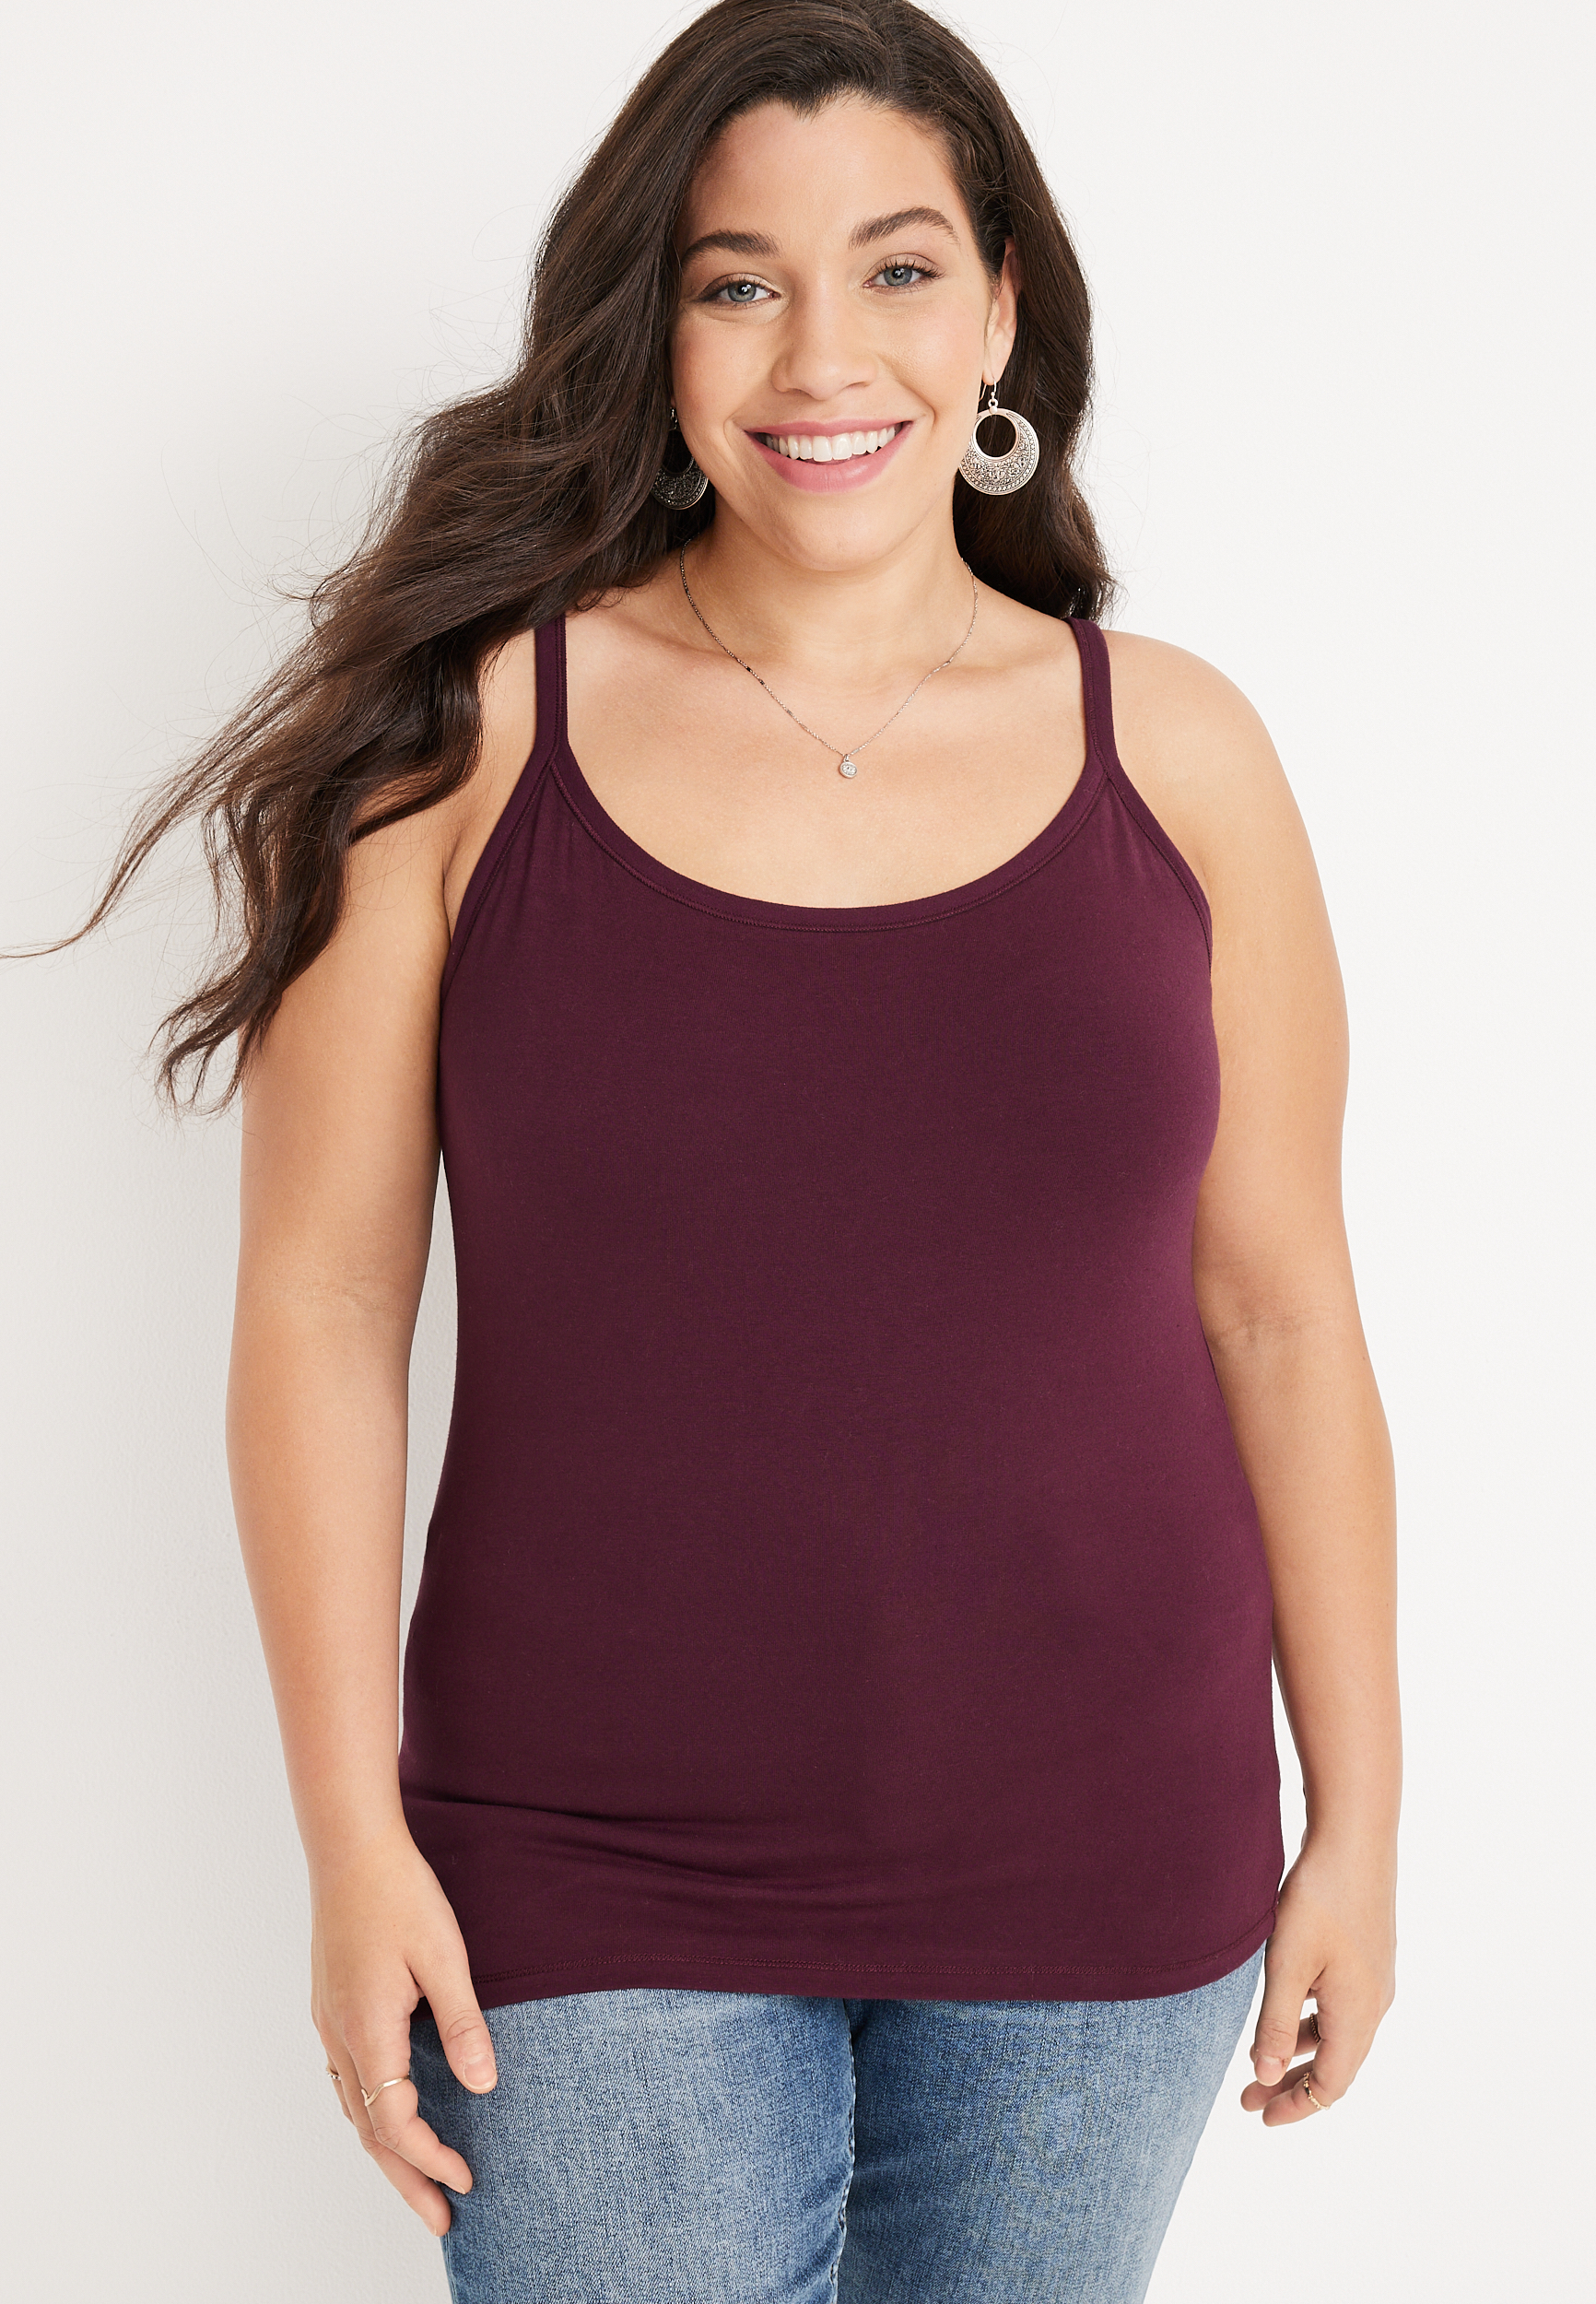 Foxy Strappy Cami  Plus size tank tops, Top outfits, Plus size